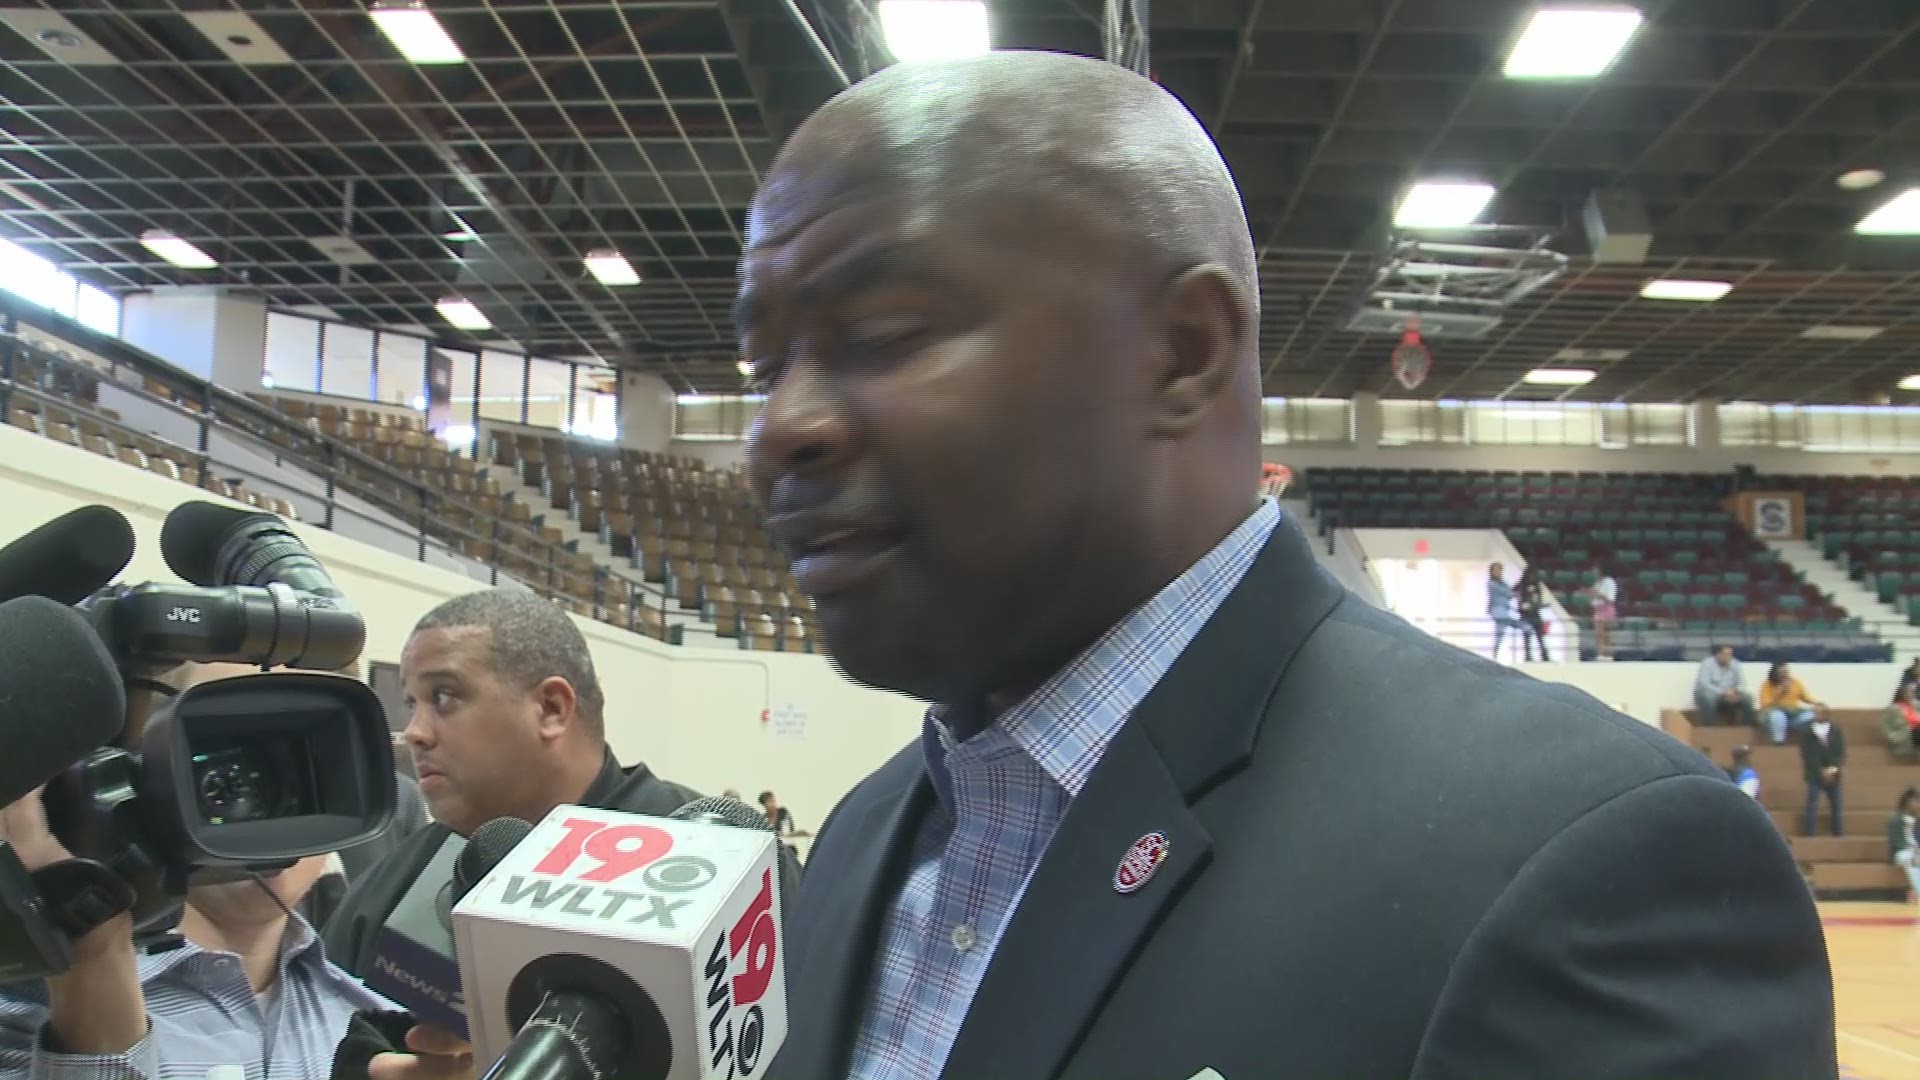 SC State head basketball coach Murray Garvin says he has been overwhelmed with the amount of support from coaches across the country as the Bulldogs continue to deal with the absence of guard Ty Solomon.